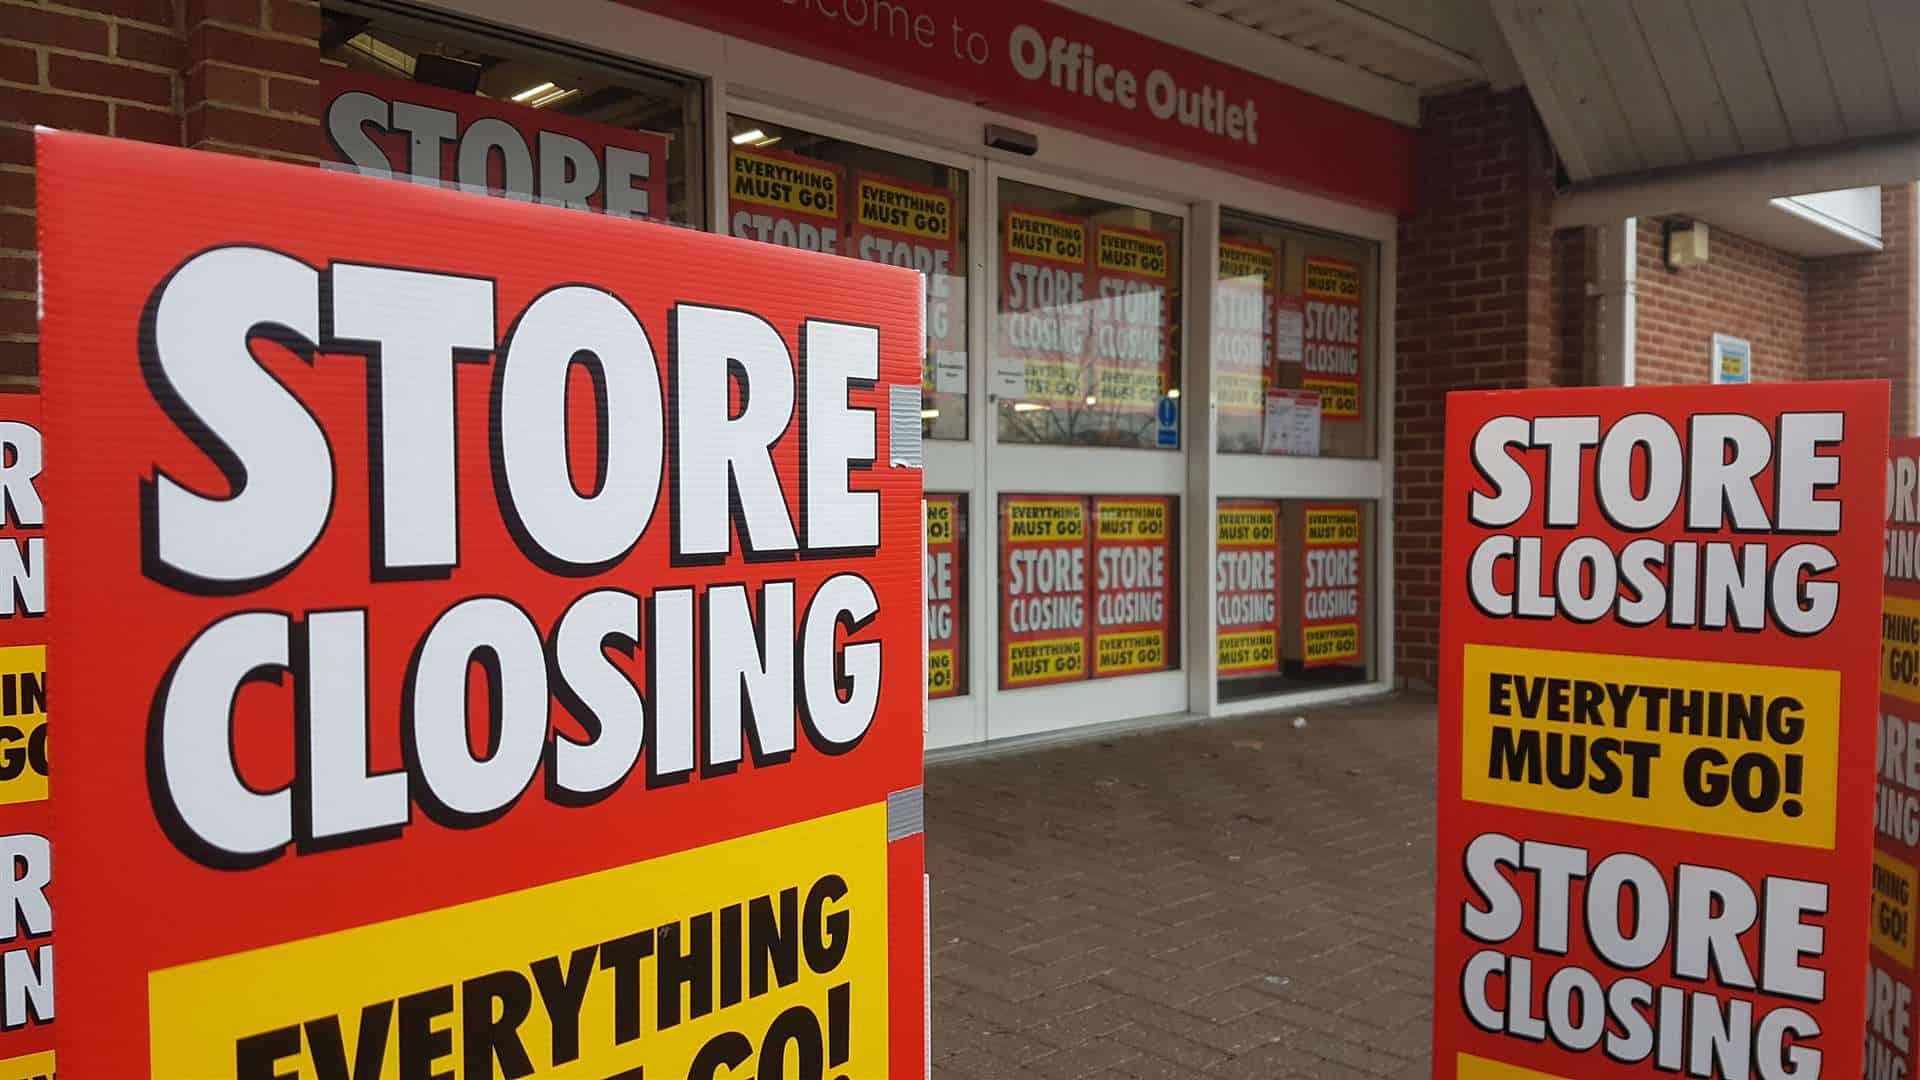 Office Outlet stores to close